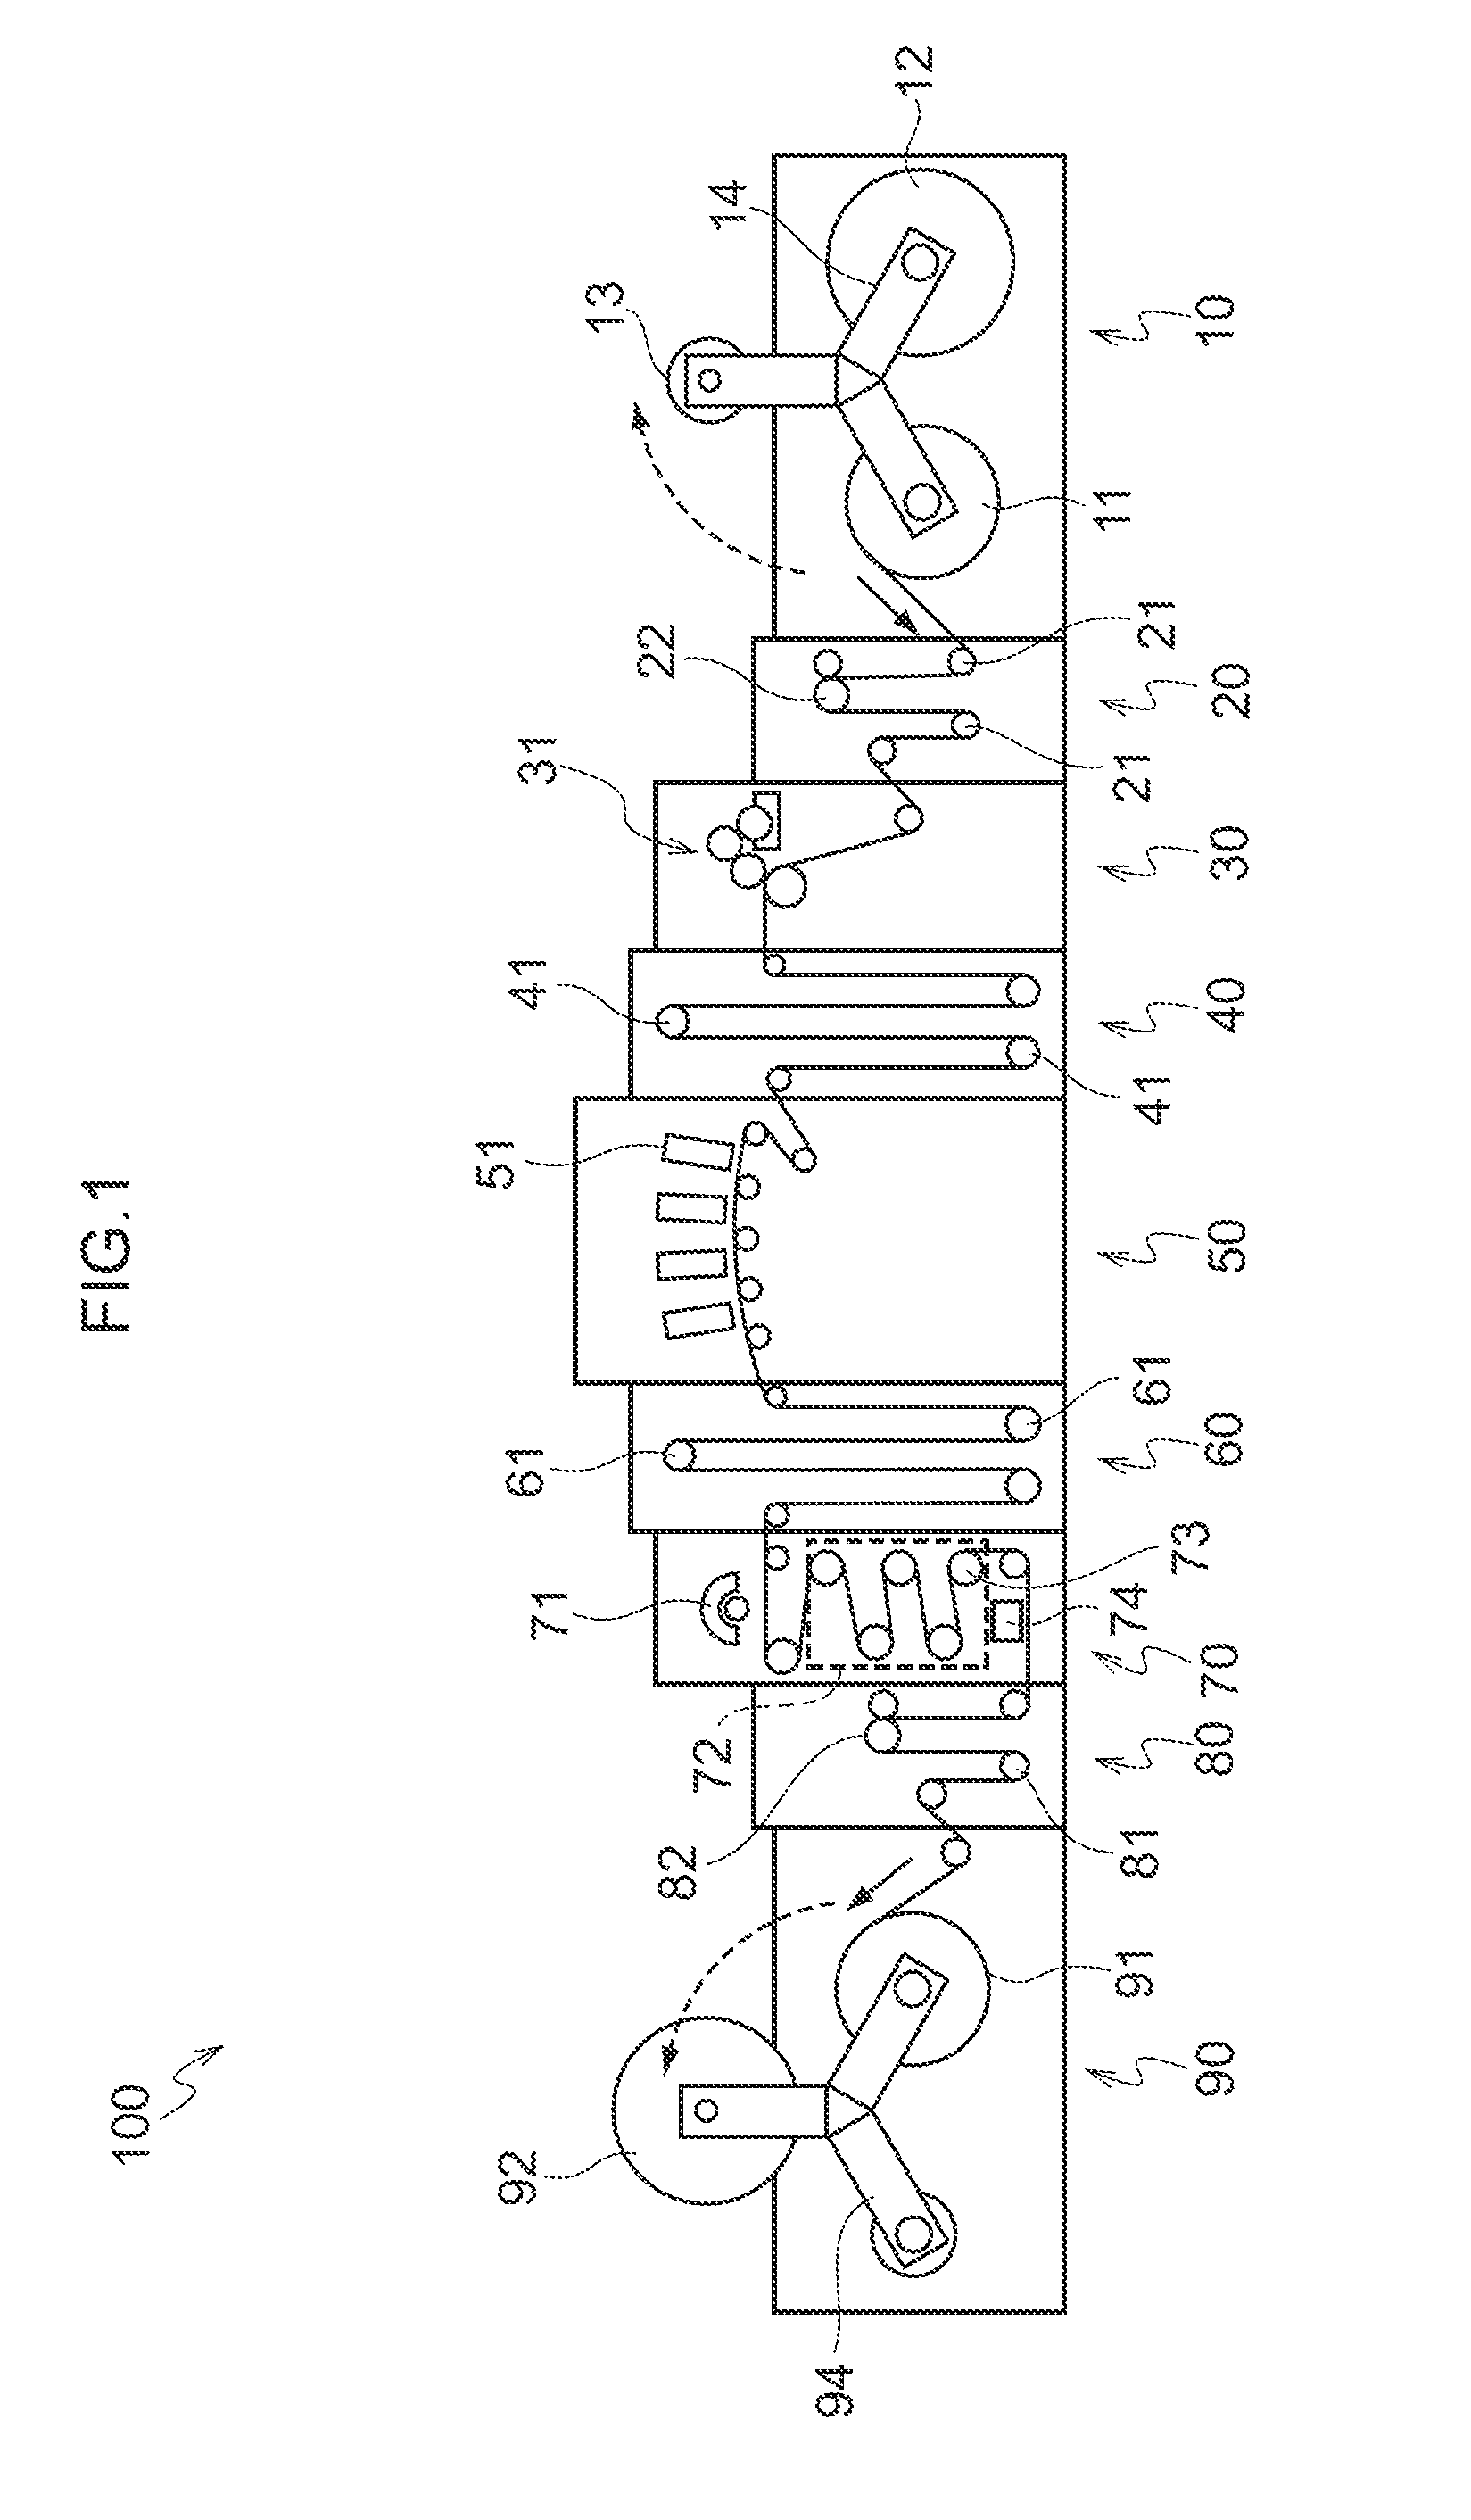 Image recording apparatus for detecting defects in nozzles using test patterns during acceleration and deceleration of recording medium